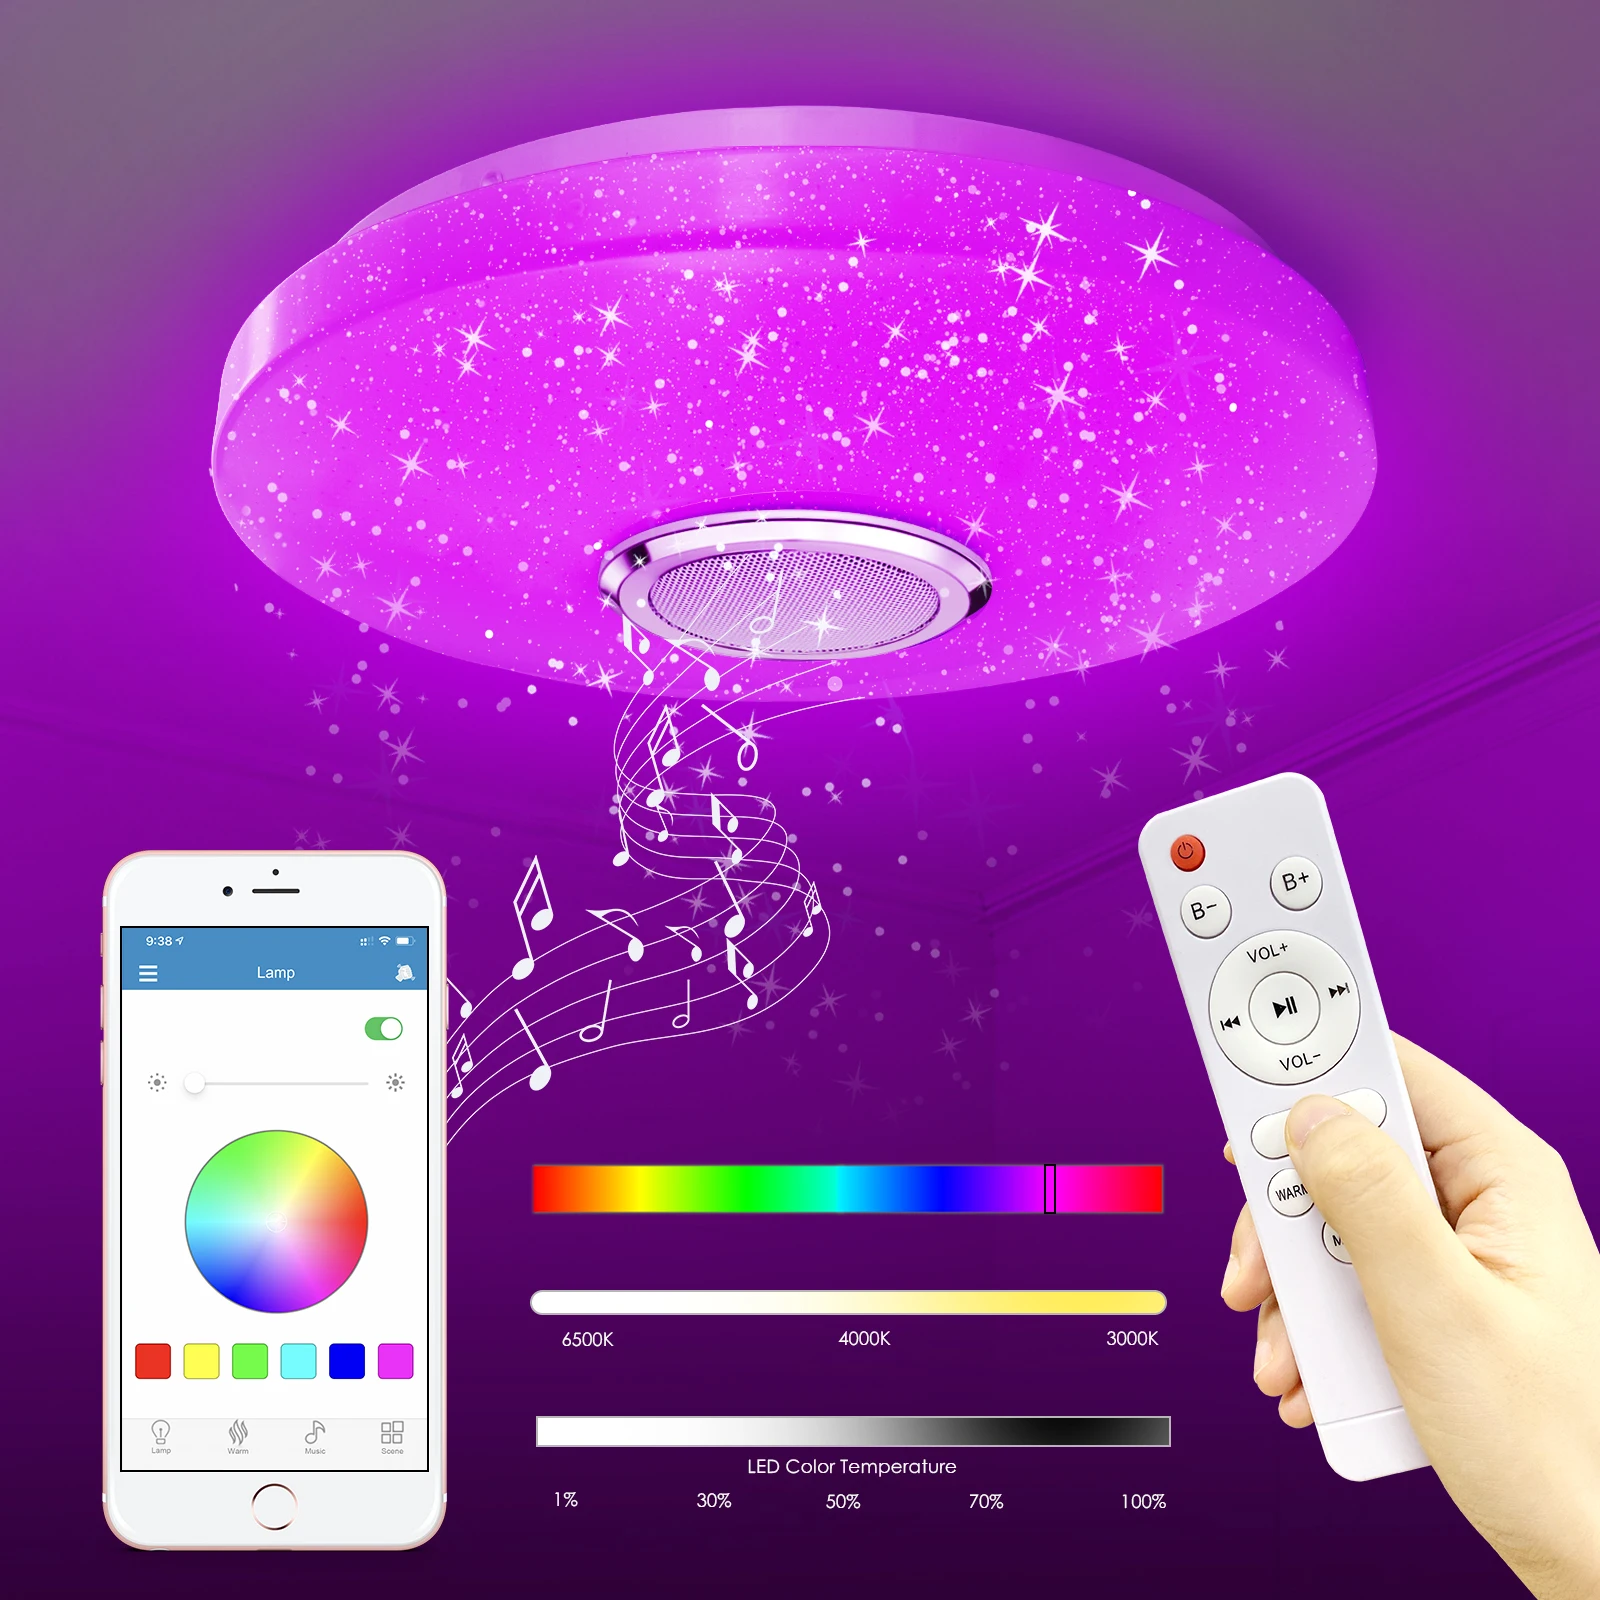 Kiidux Bluetooth Music Led Ceiling Lamp RGB Color Switch Speaker Remote Control APP Night Light Energy Conservation for All Room